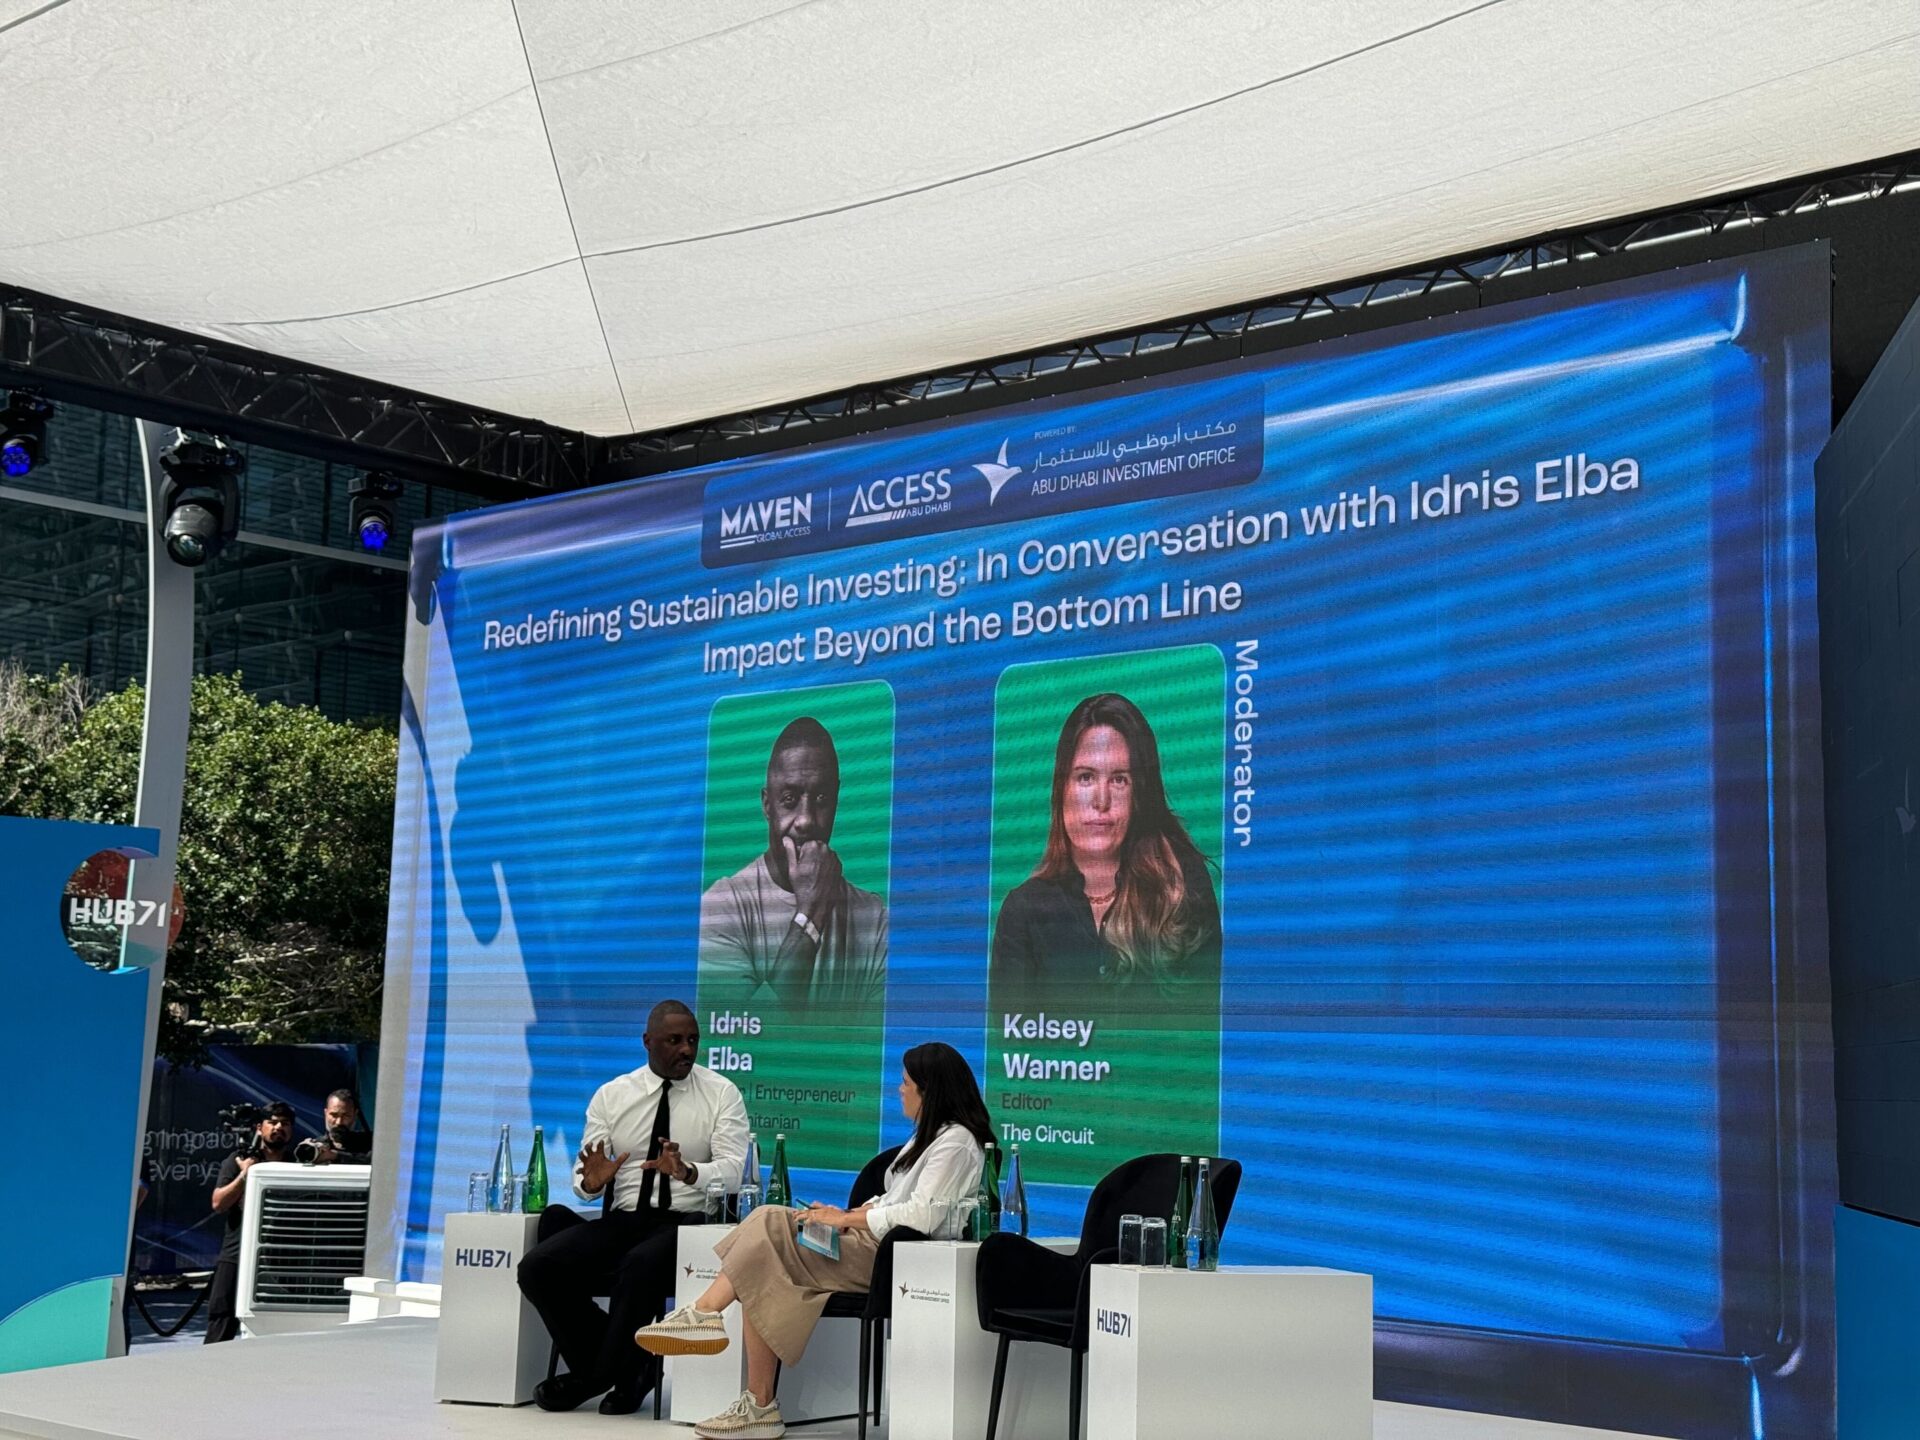 British actor Idris Elba is interviewed onstage by The Circuit’s Kelsey Warner about his business ventures during the Hub71 Impact event in Abu Dhabi.